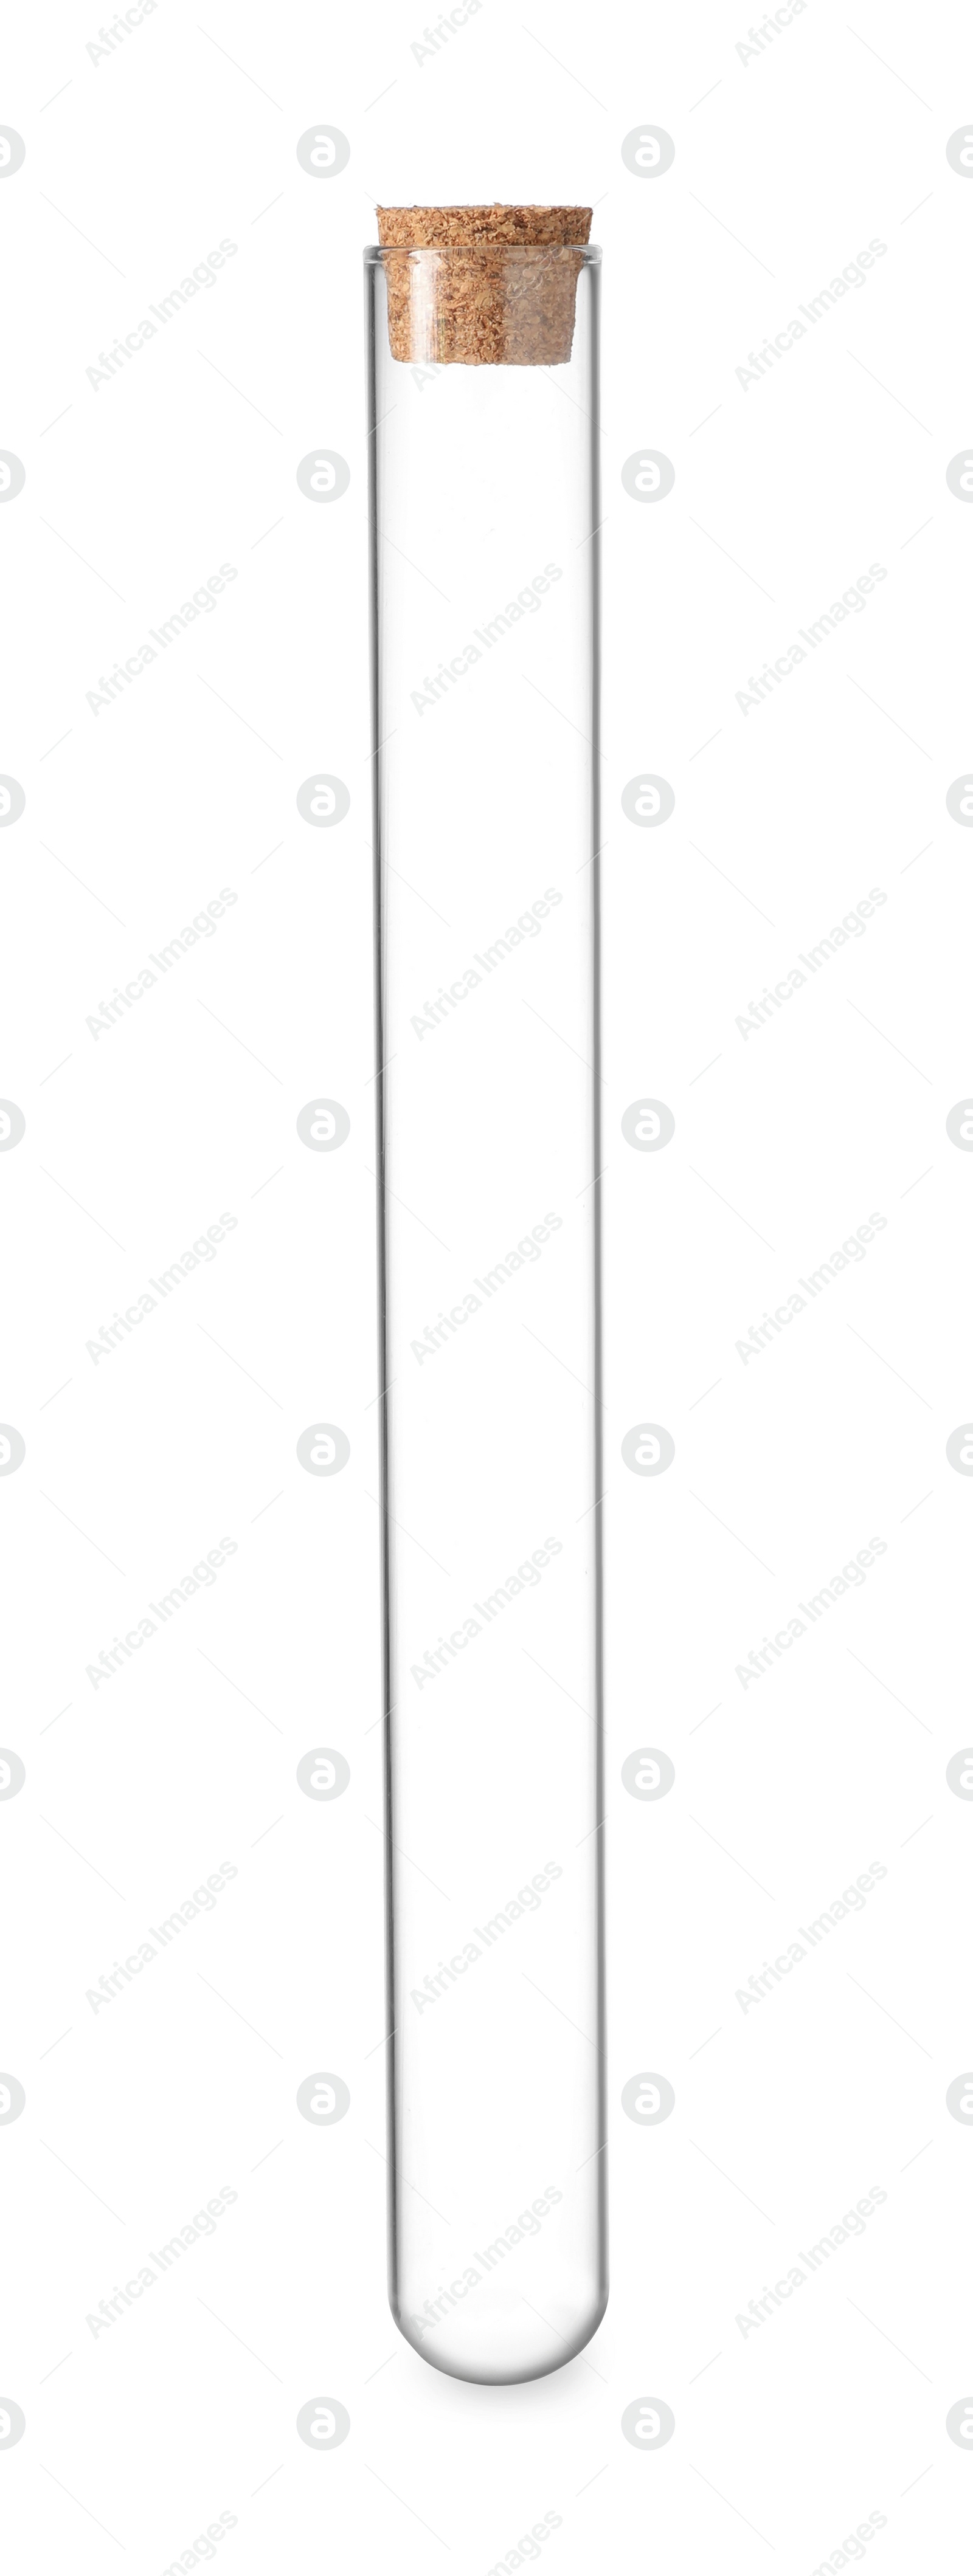 Image of Empty glass test tube isolated on white